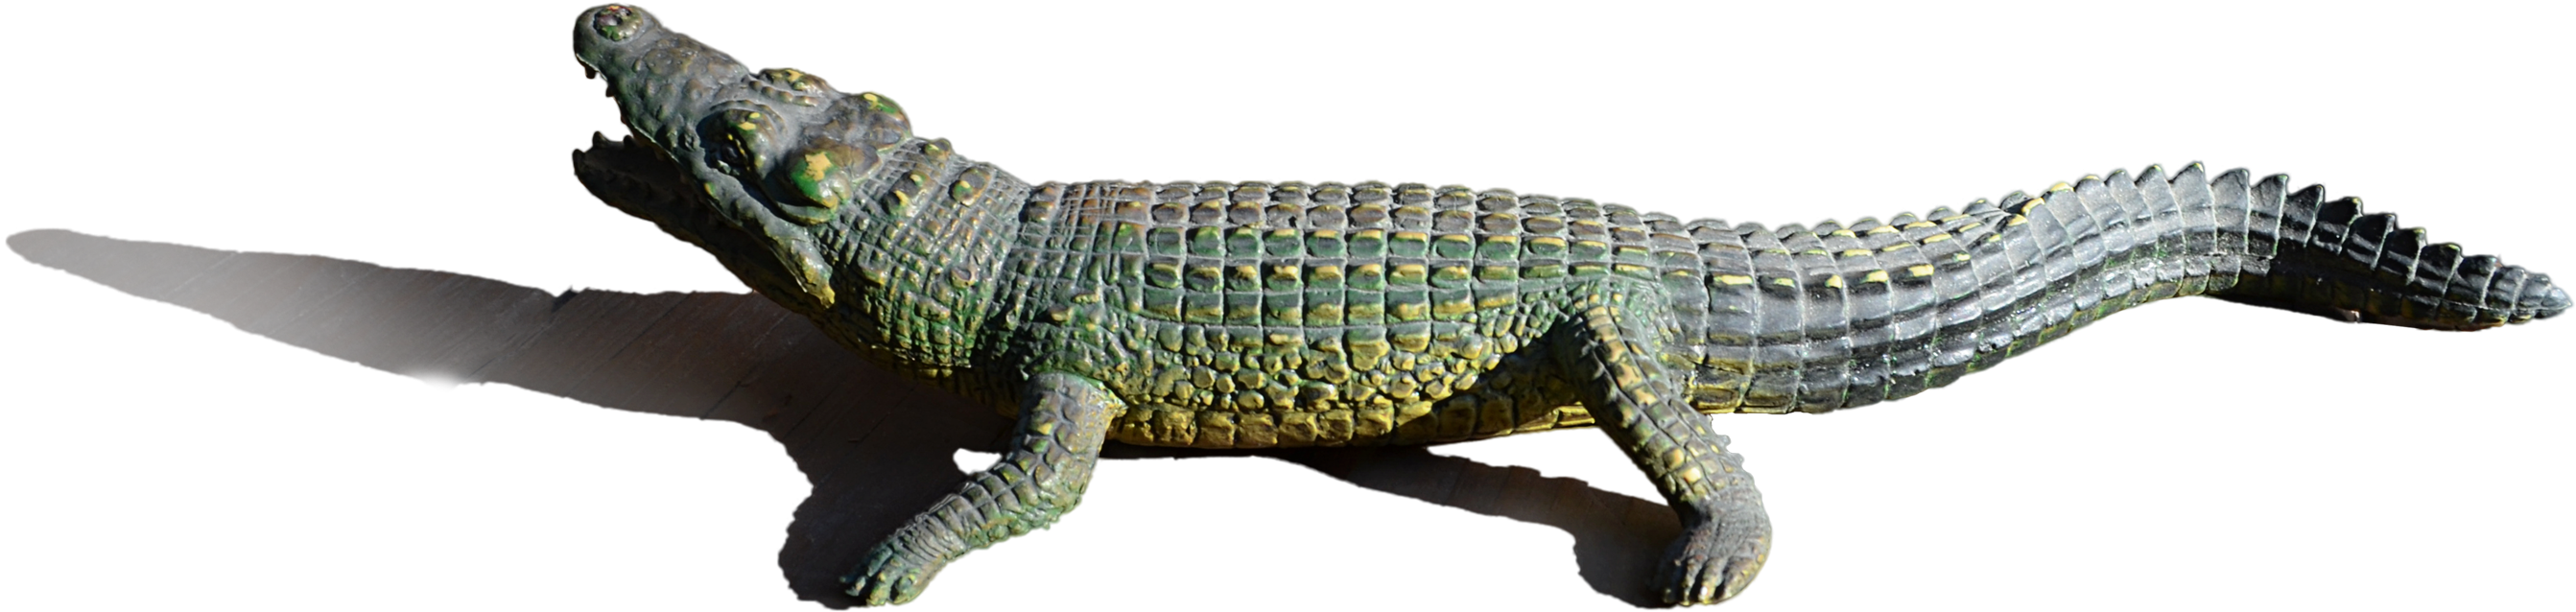 A Green And Yellow Reptile